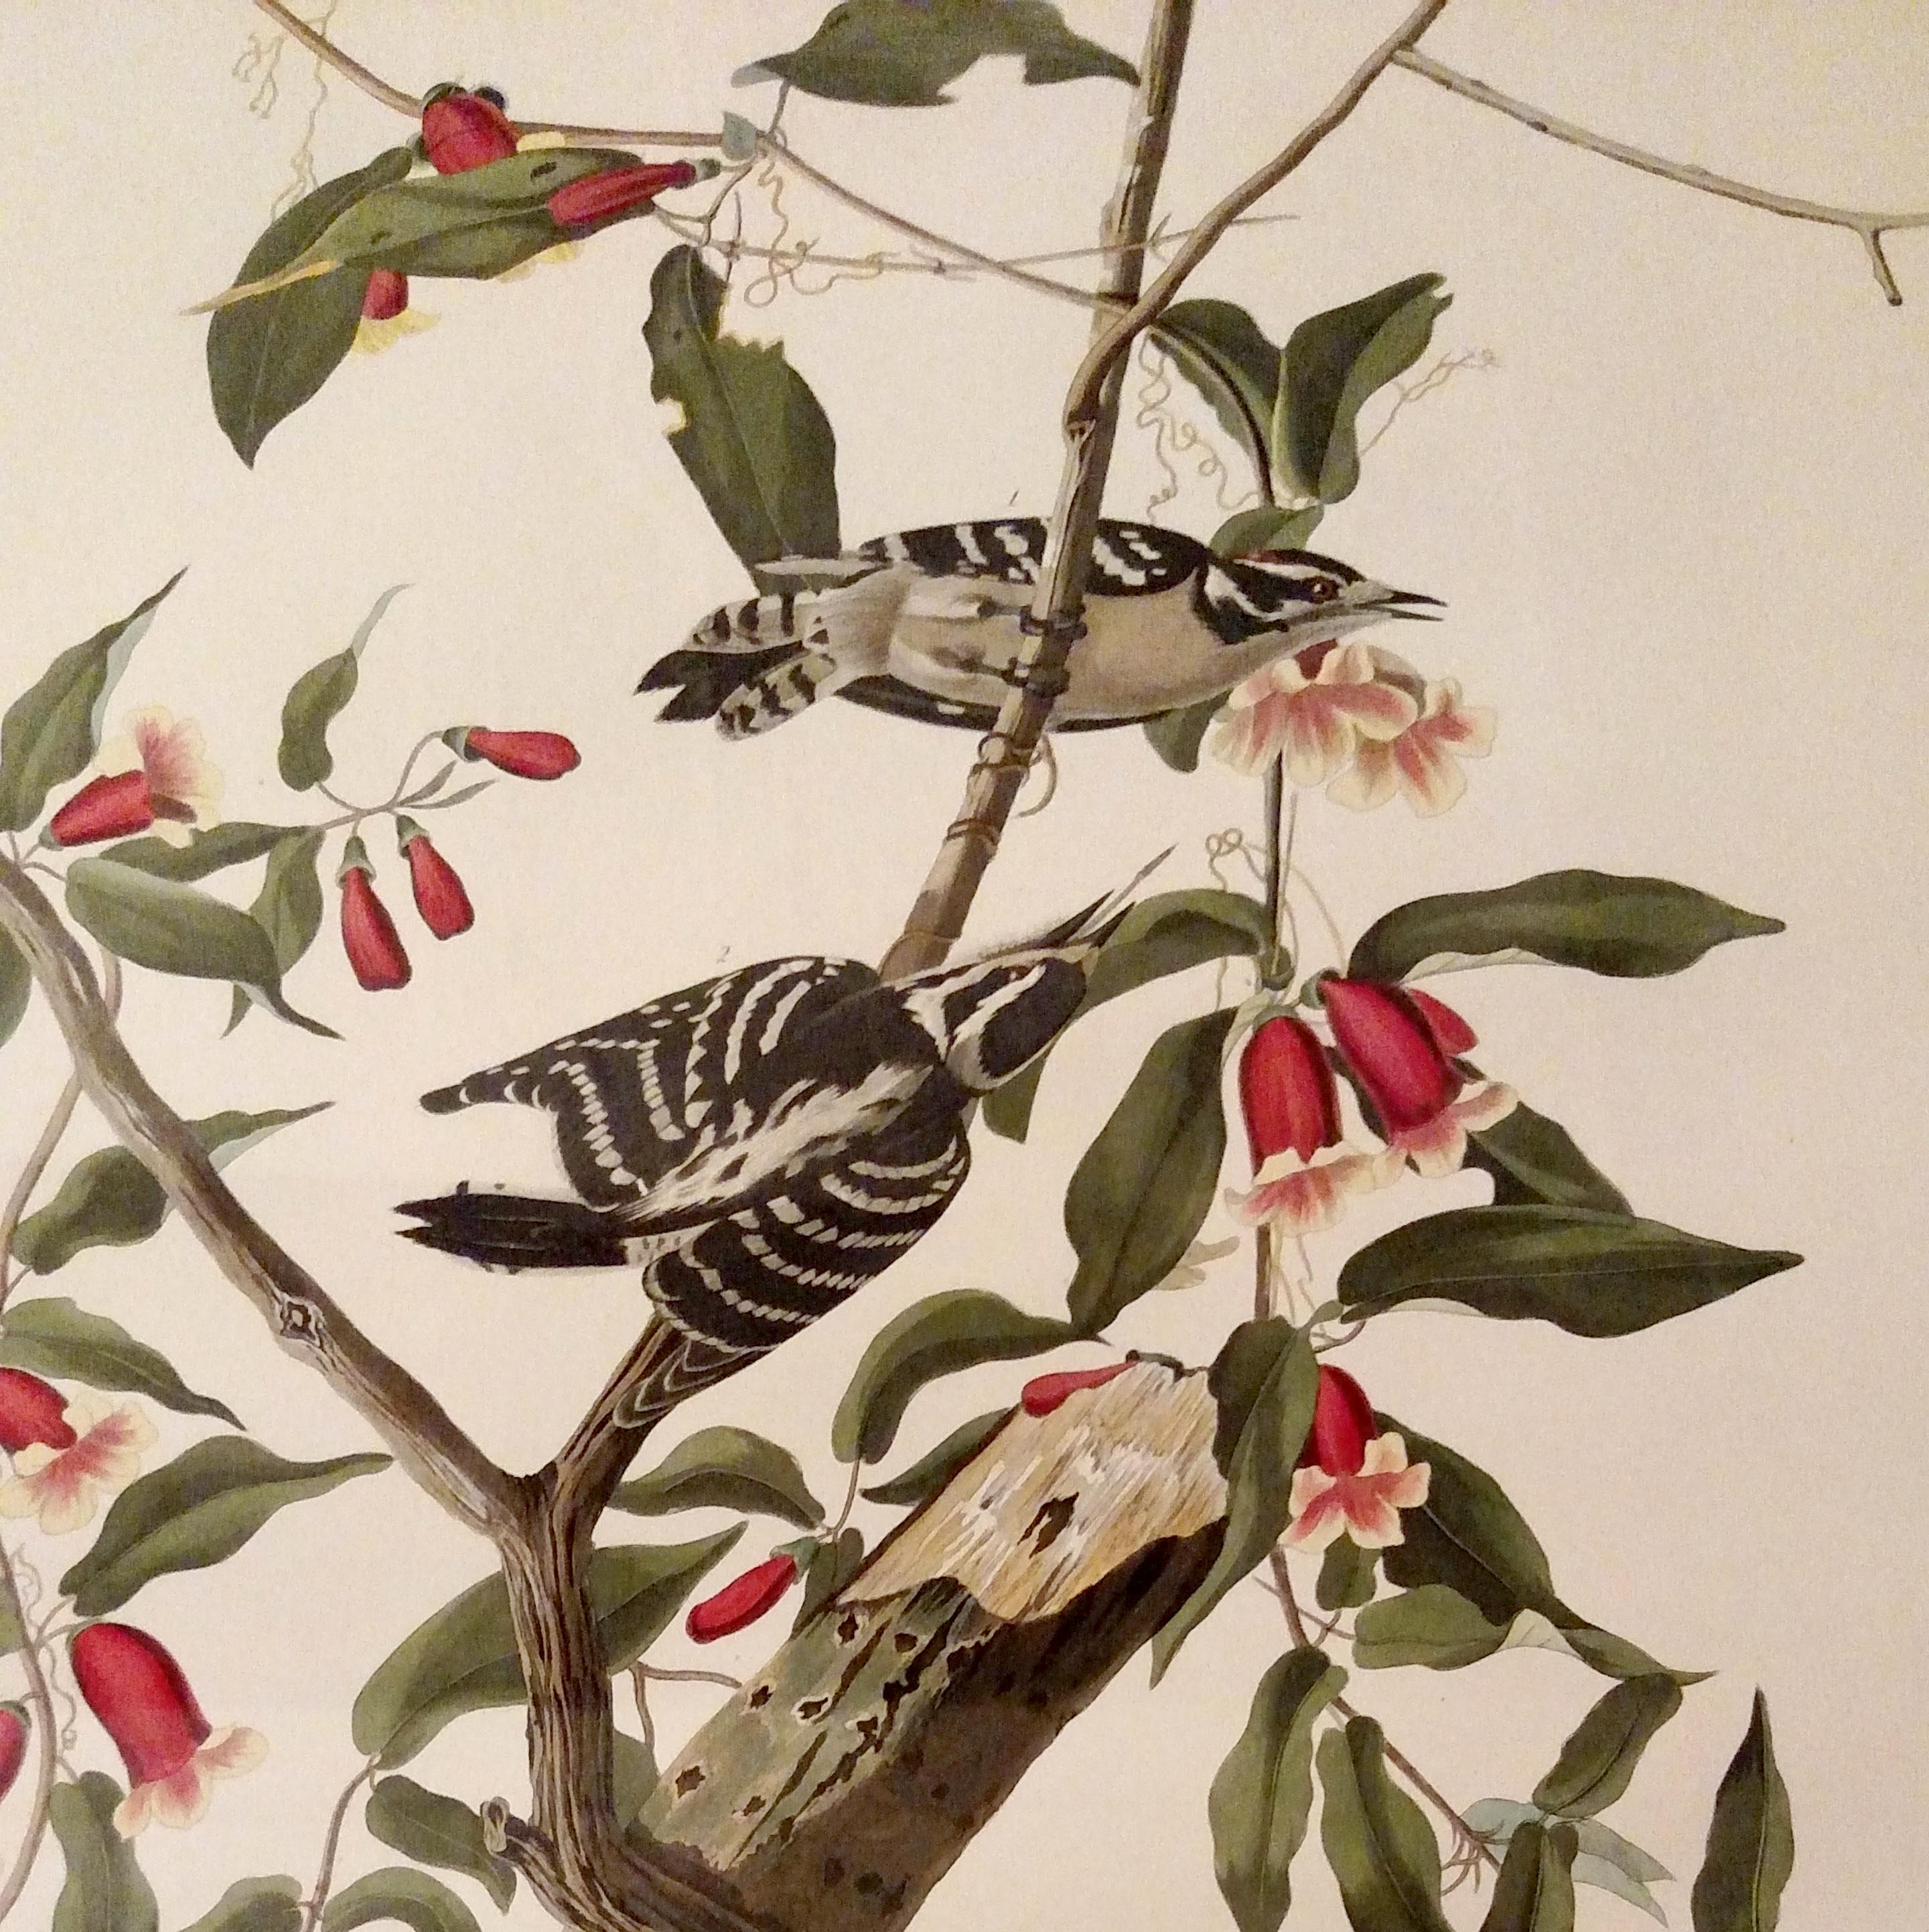 engraving with watercolor painting of woodpecker and flowering vine